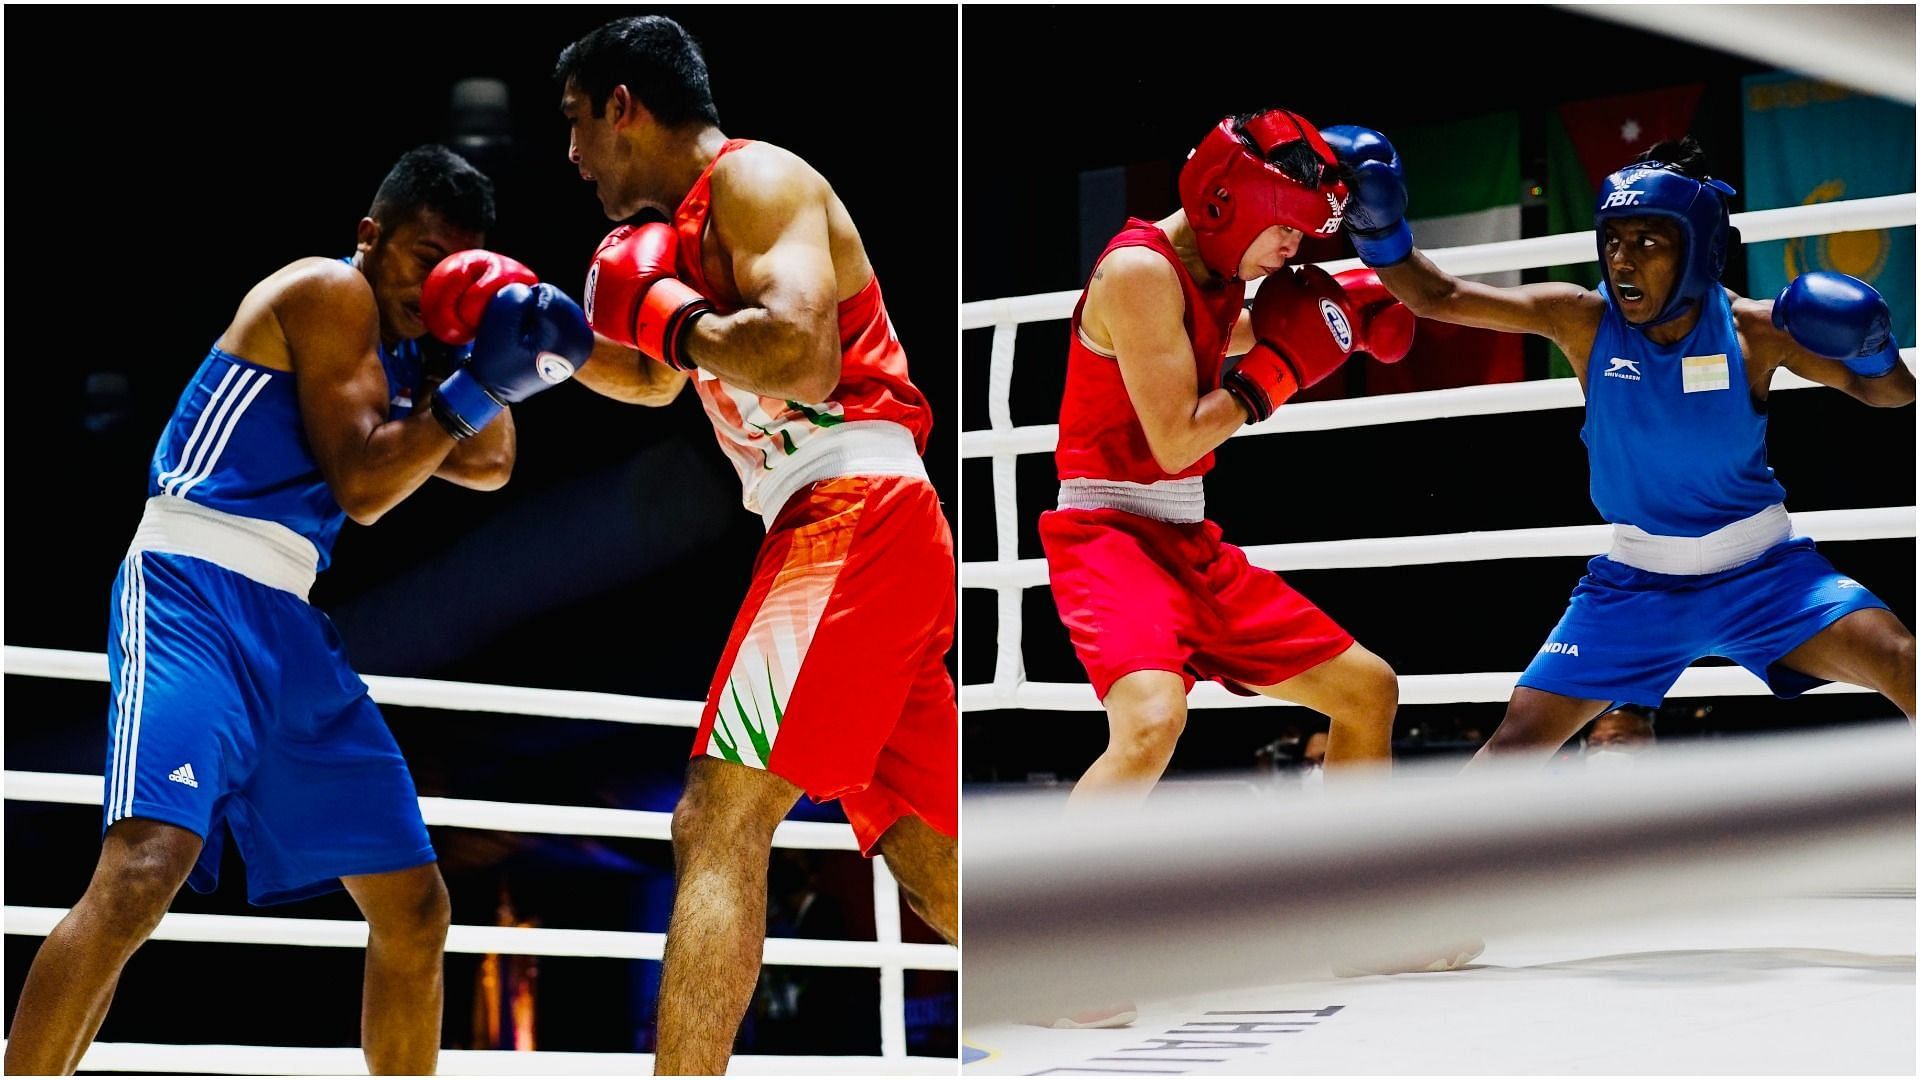 Indian pugilists Ashish Kumar (left) and Monika (right) in action at the 2022 Thailand Open International Boxing Tournament (Pic Credit: BFI)